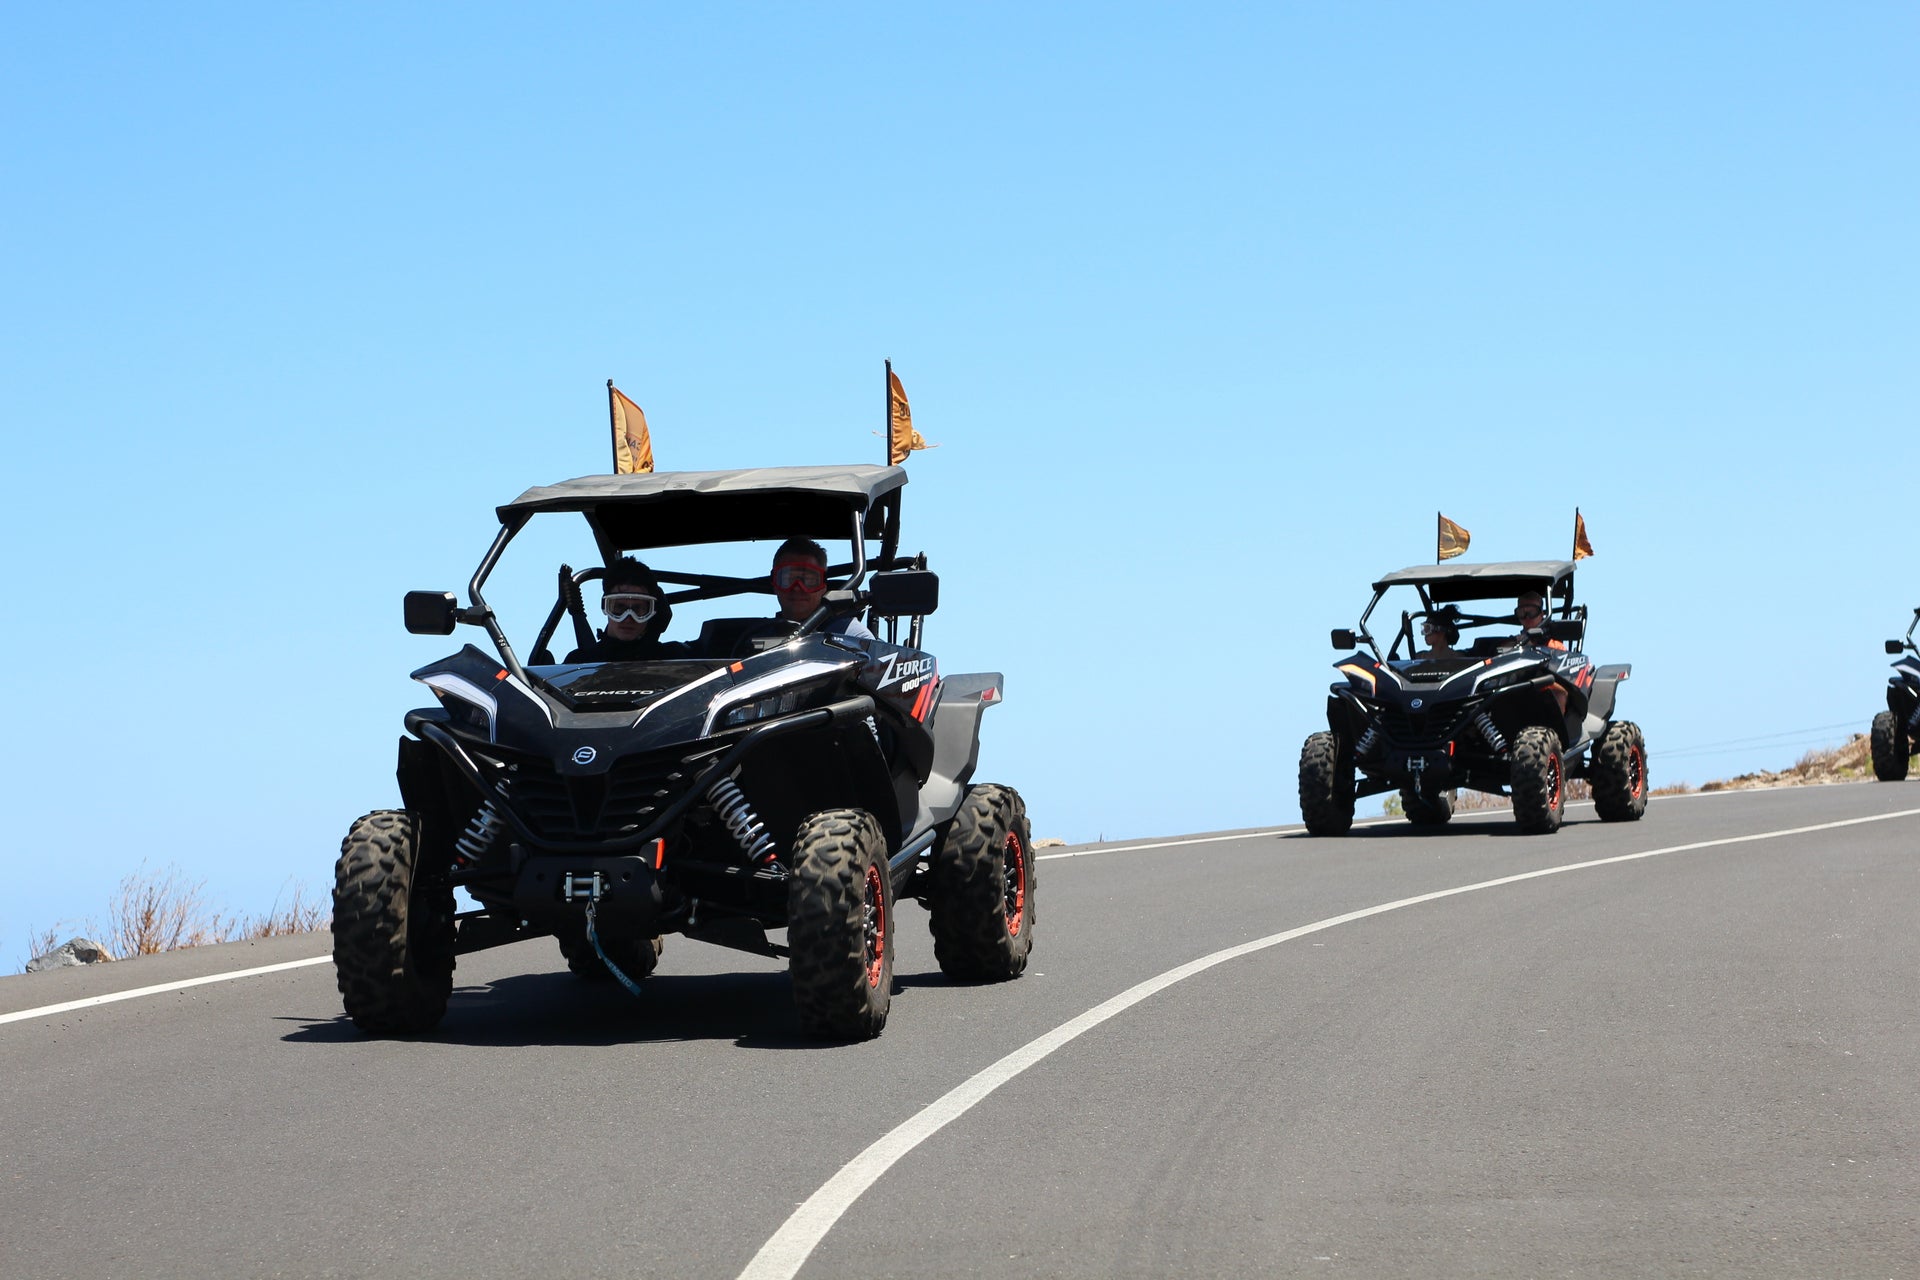 Tour del Teide in buggy